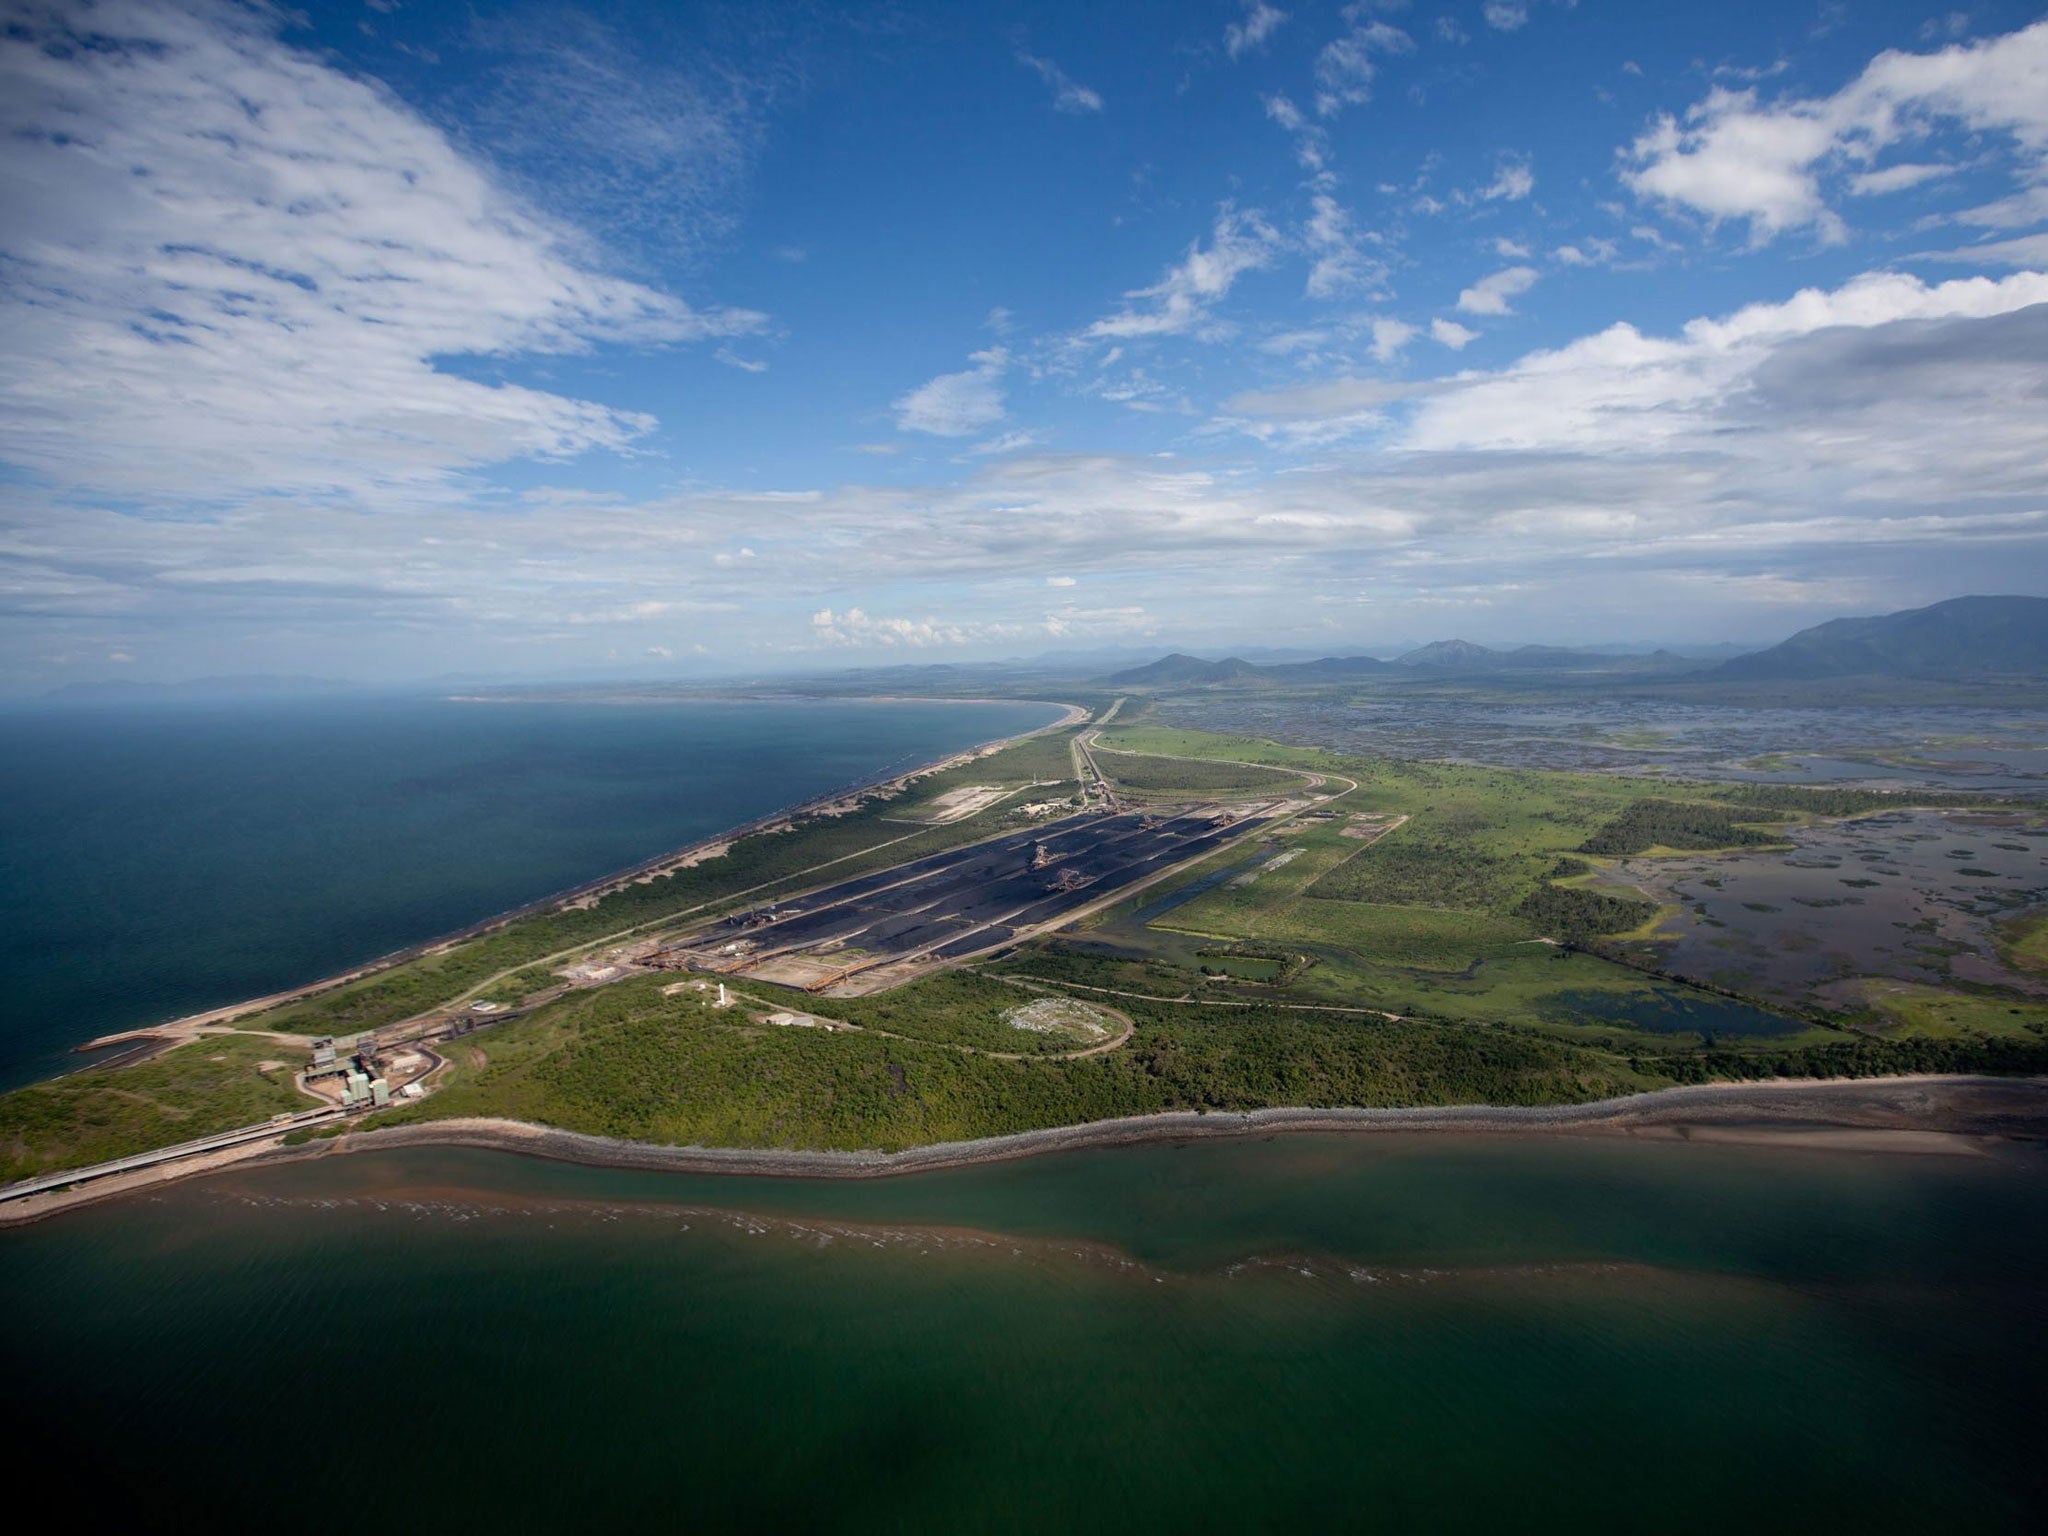 A picture made available by Greenpeace shows an aerial view of the Abbot Point coal point, where controversial plans to dump sludge in Great Barrier Reef Marine Park waters have been approved